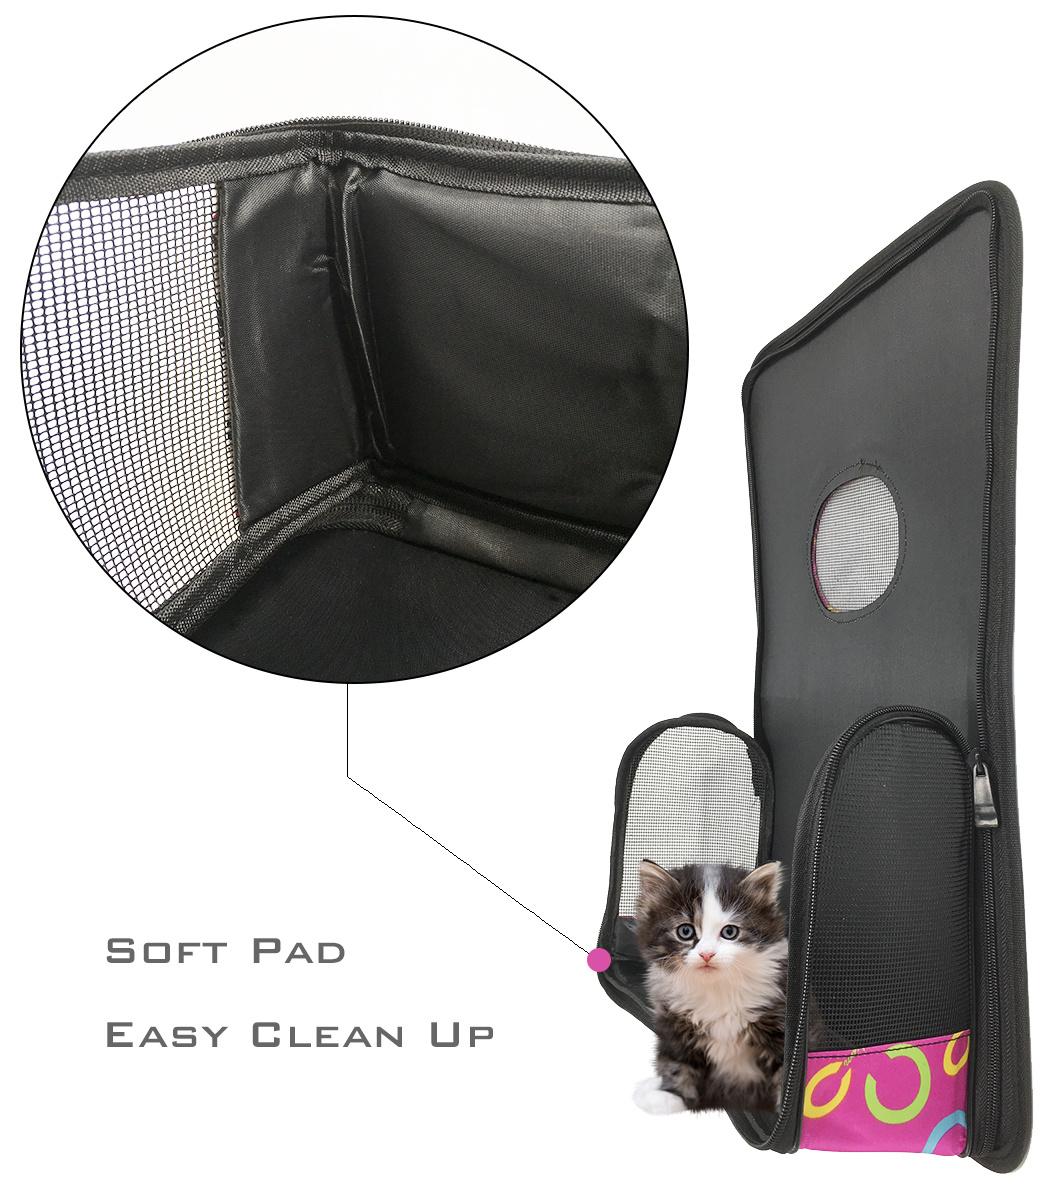 Medium Cats and Small Dogs Breathable Leak-Proof Easy Storag Pet Carrier with Cozy Bed